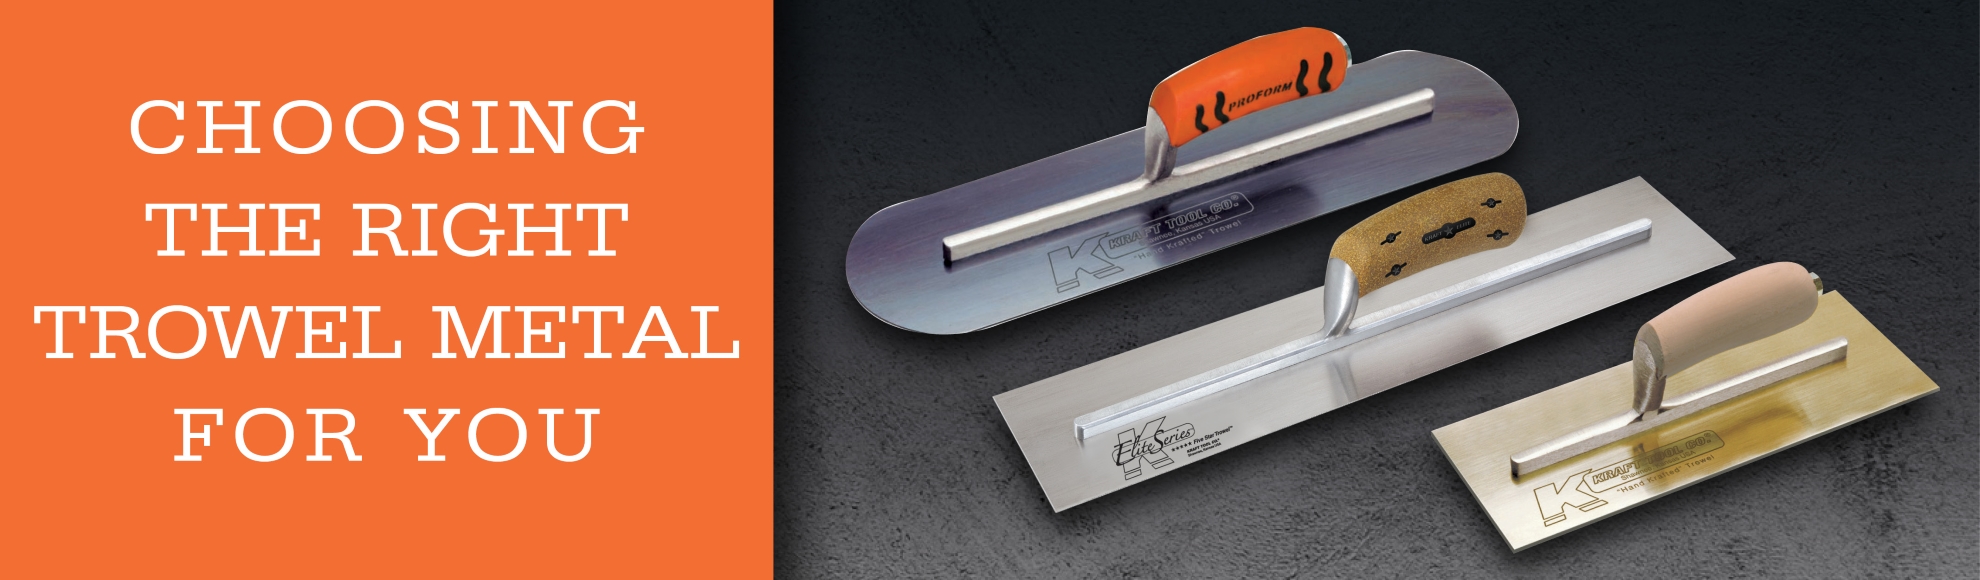 Kraft Tool Co- Choosing the Right Trowel Metal for You